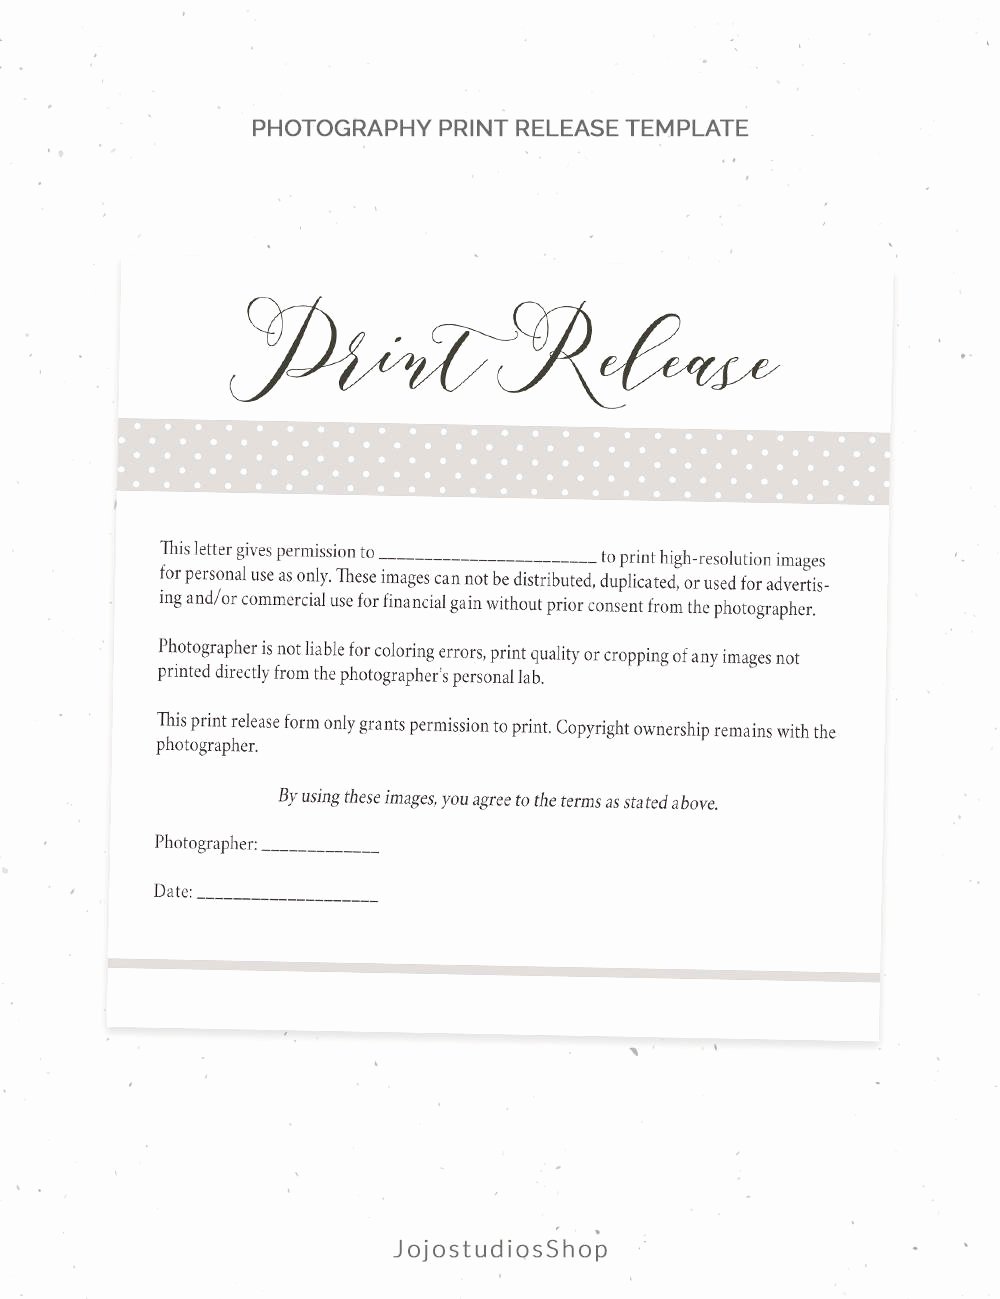 Photo Release form Template Free Inspirational Graphy Print Release form Template Graphy Template